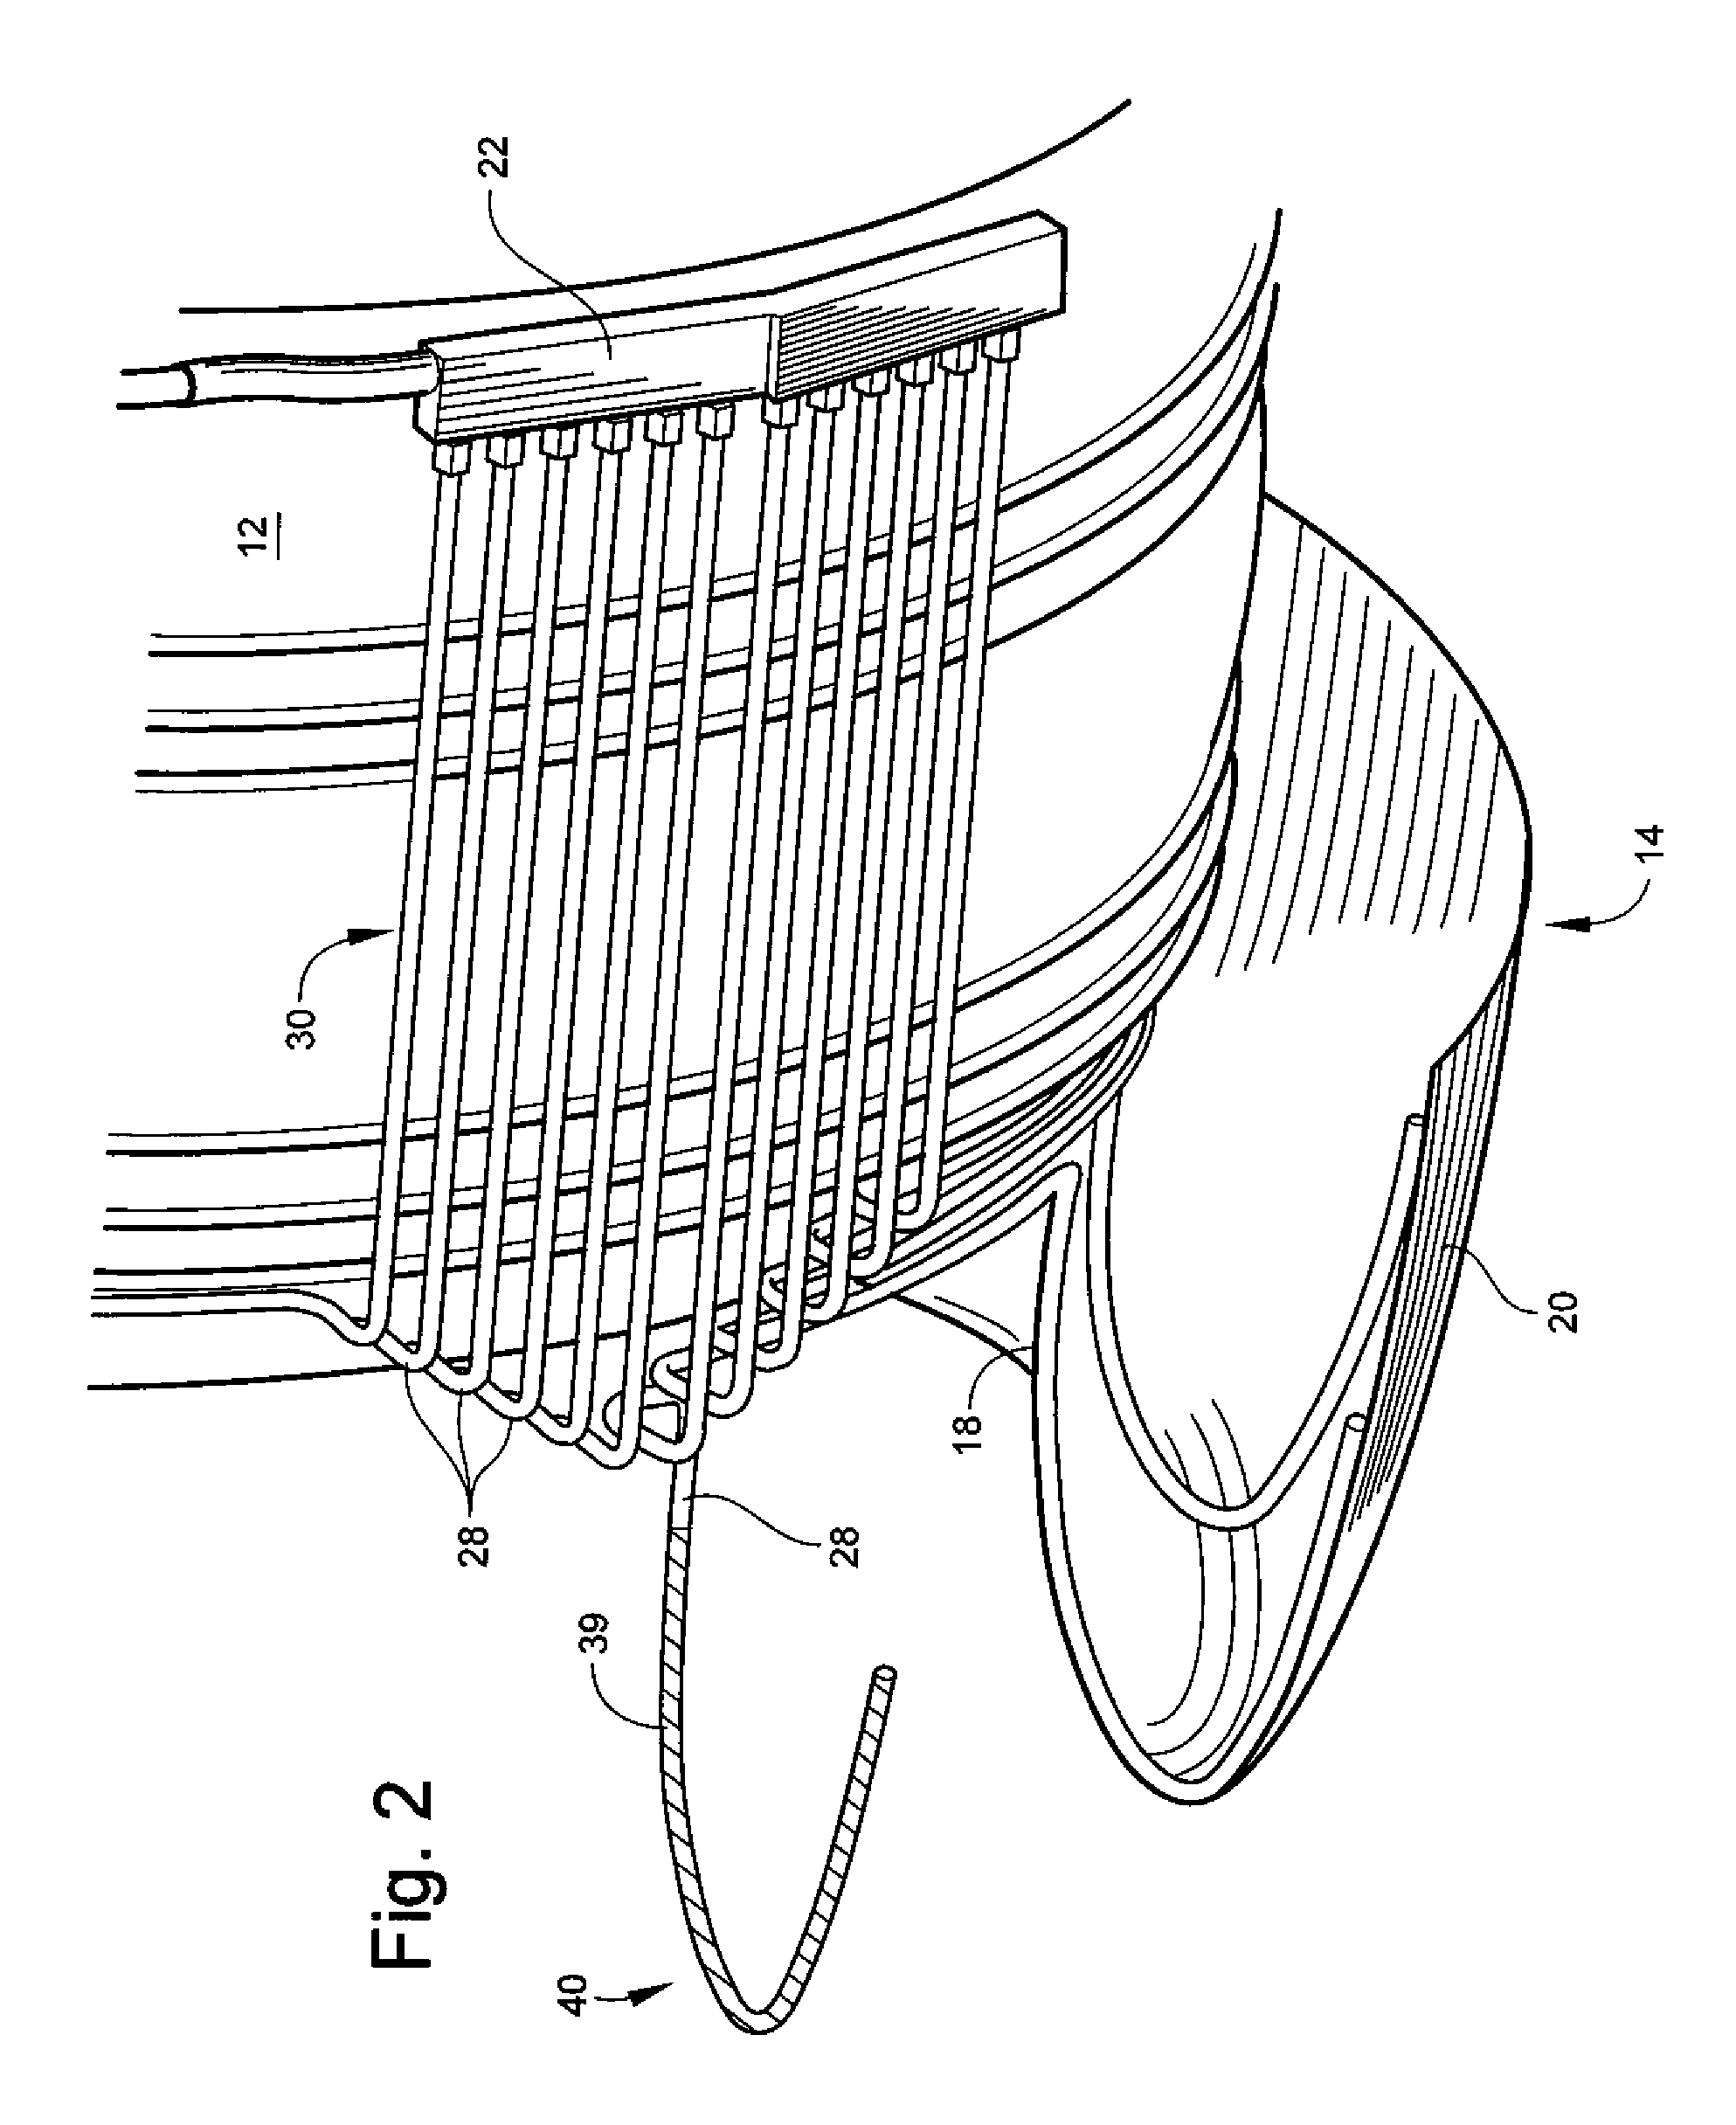 Heat transfer system and method for turbine engine using heat pipes